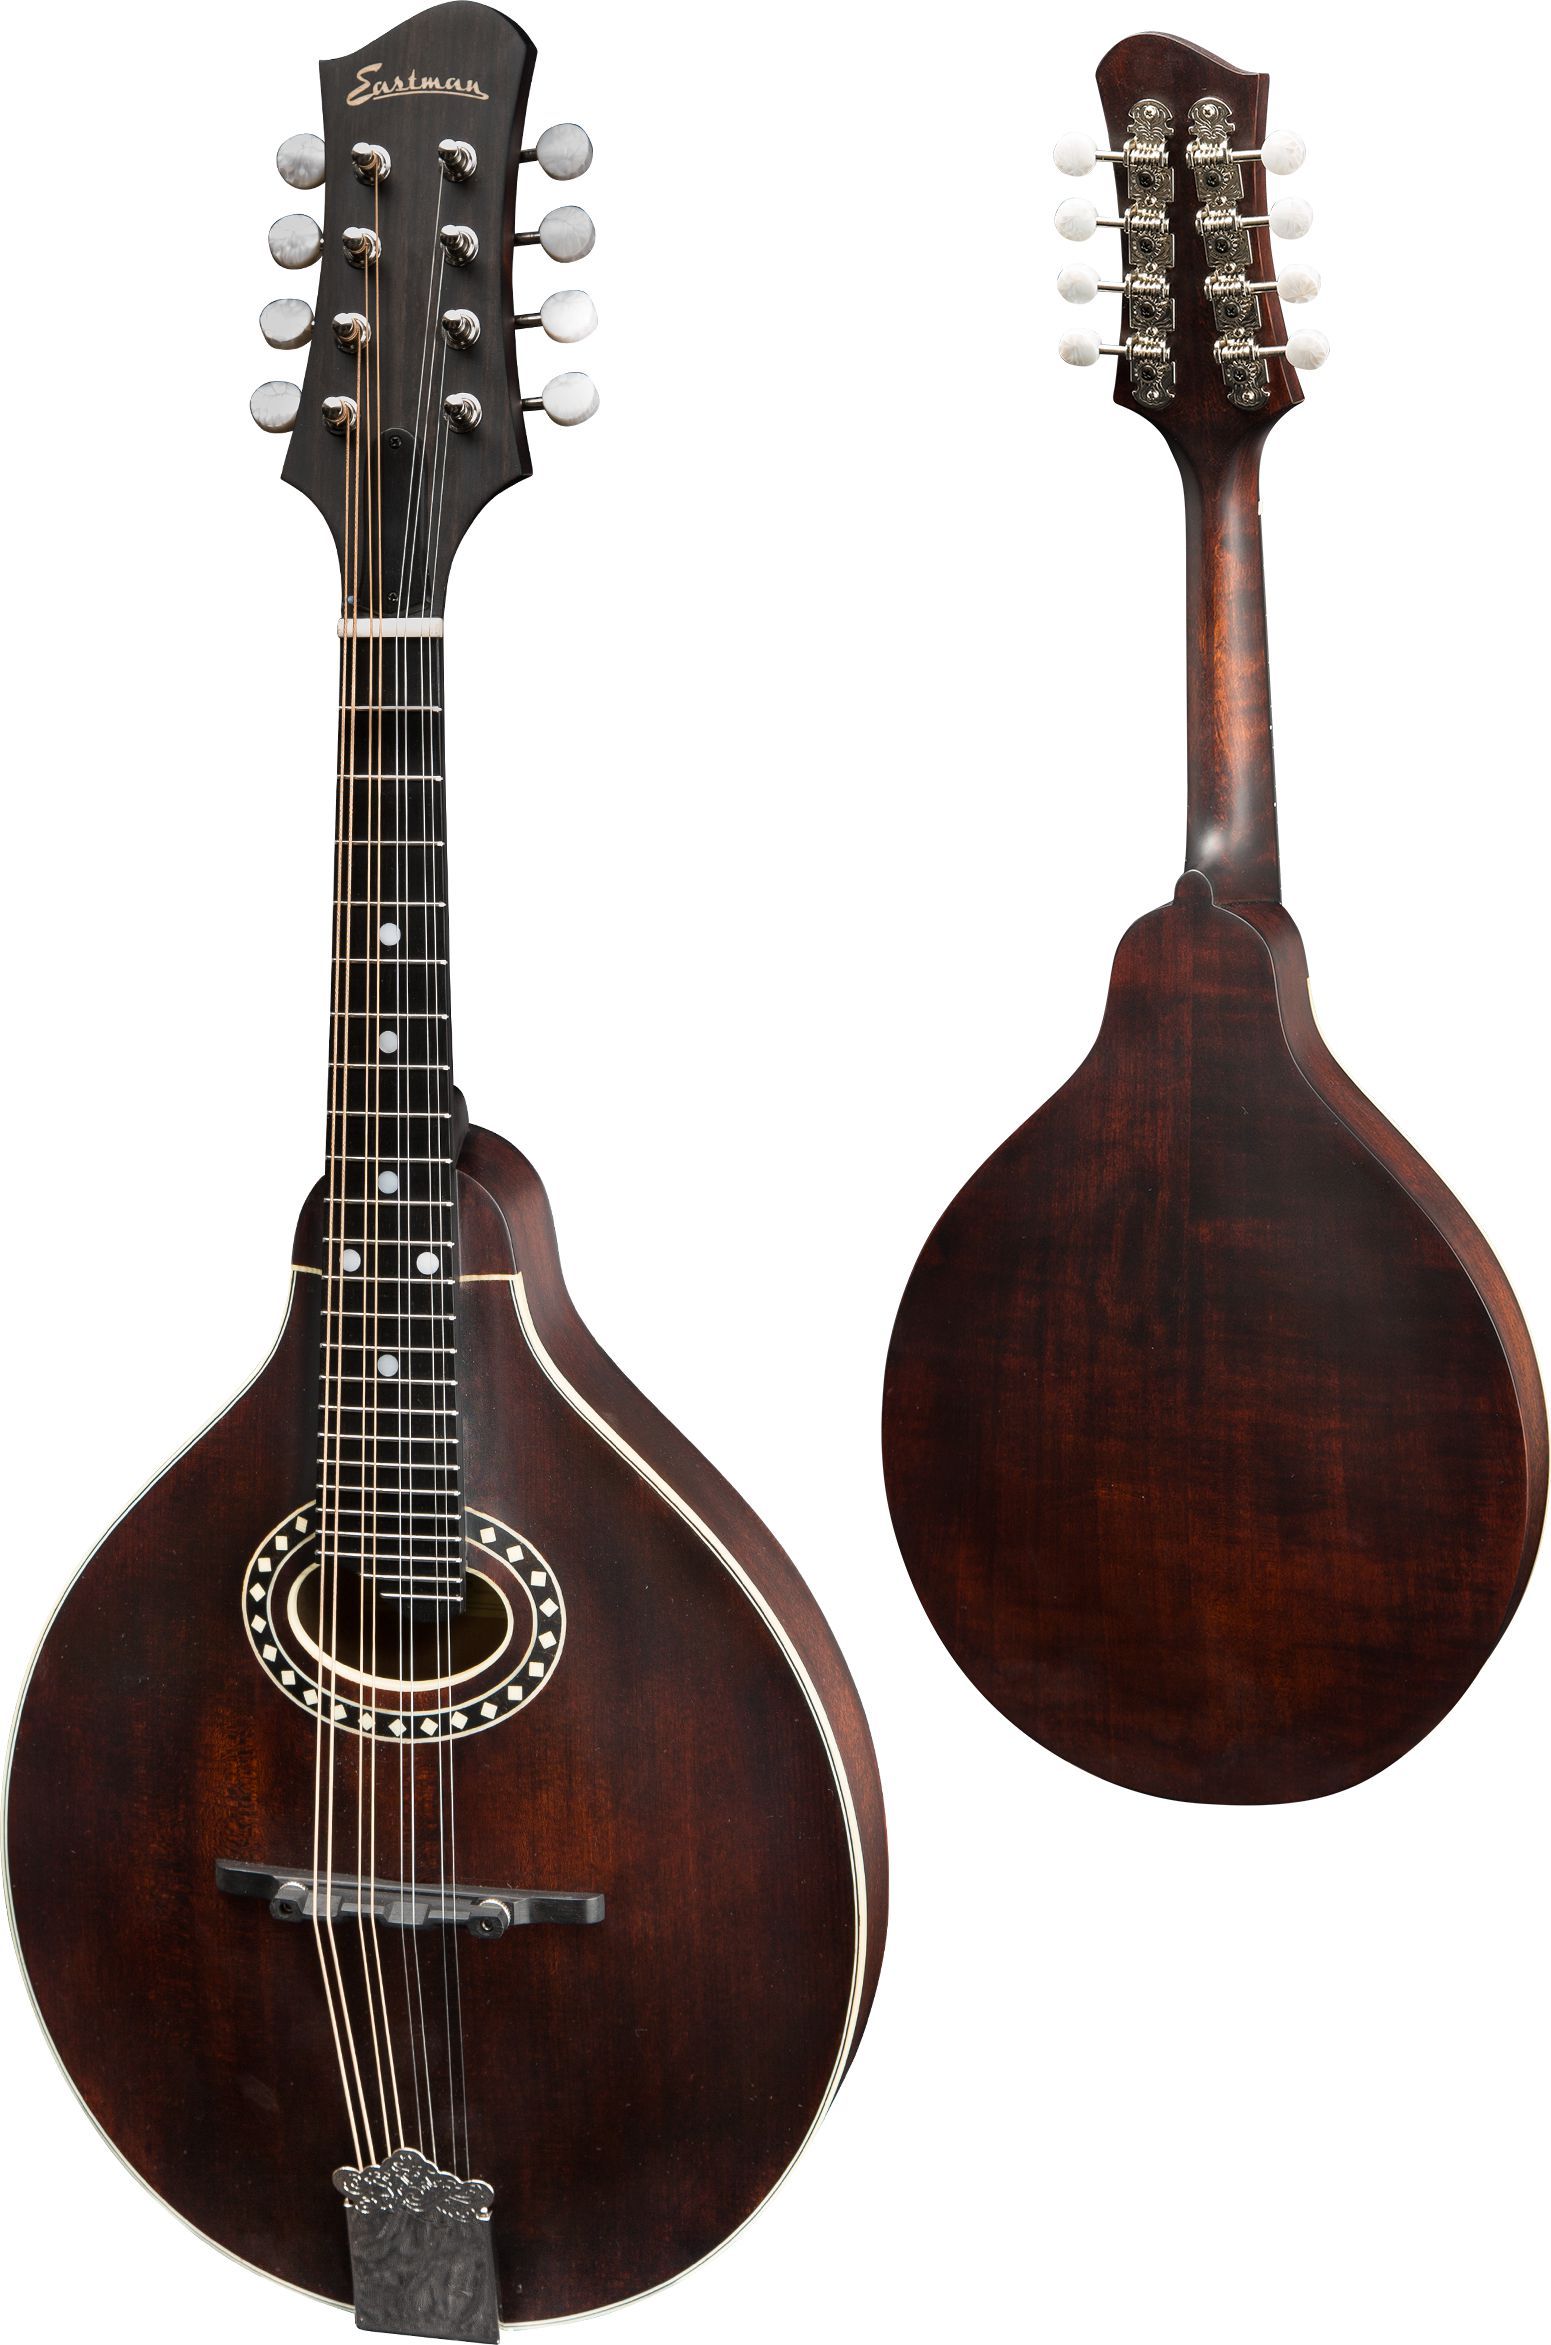 Eastman MD304L A-style Mandolin (oval hole, Solid Spruce top, Solid Maple back and sides, w/Gigbag), Mandolin for sale at Richards Guitars.